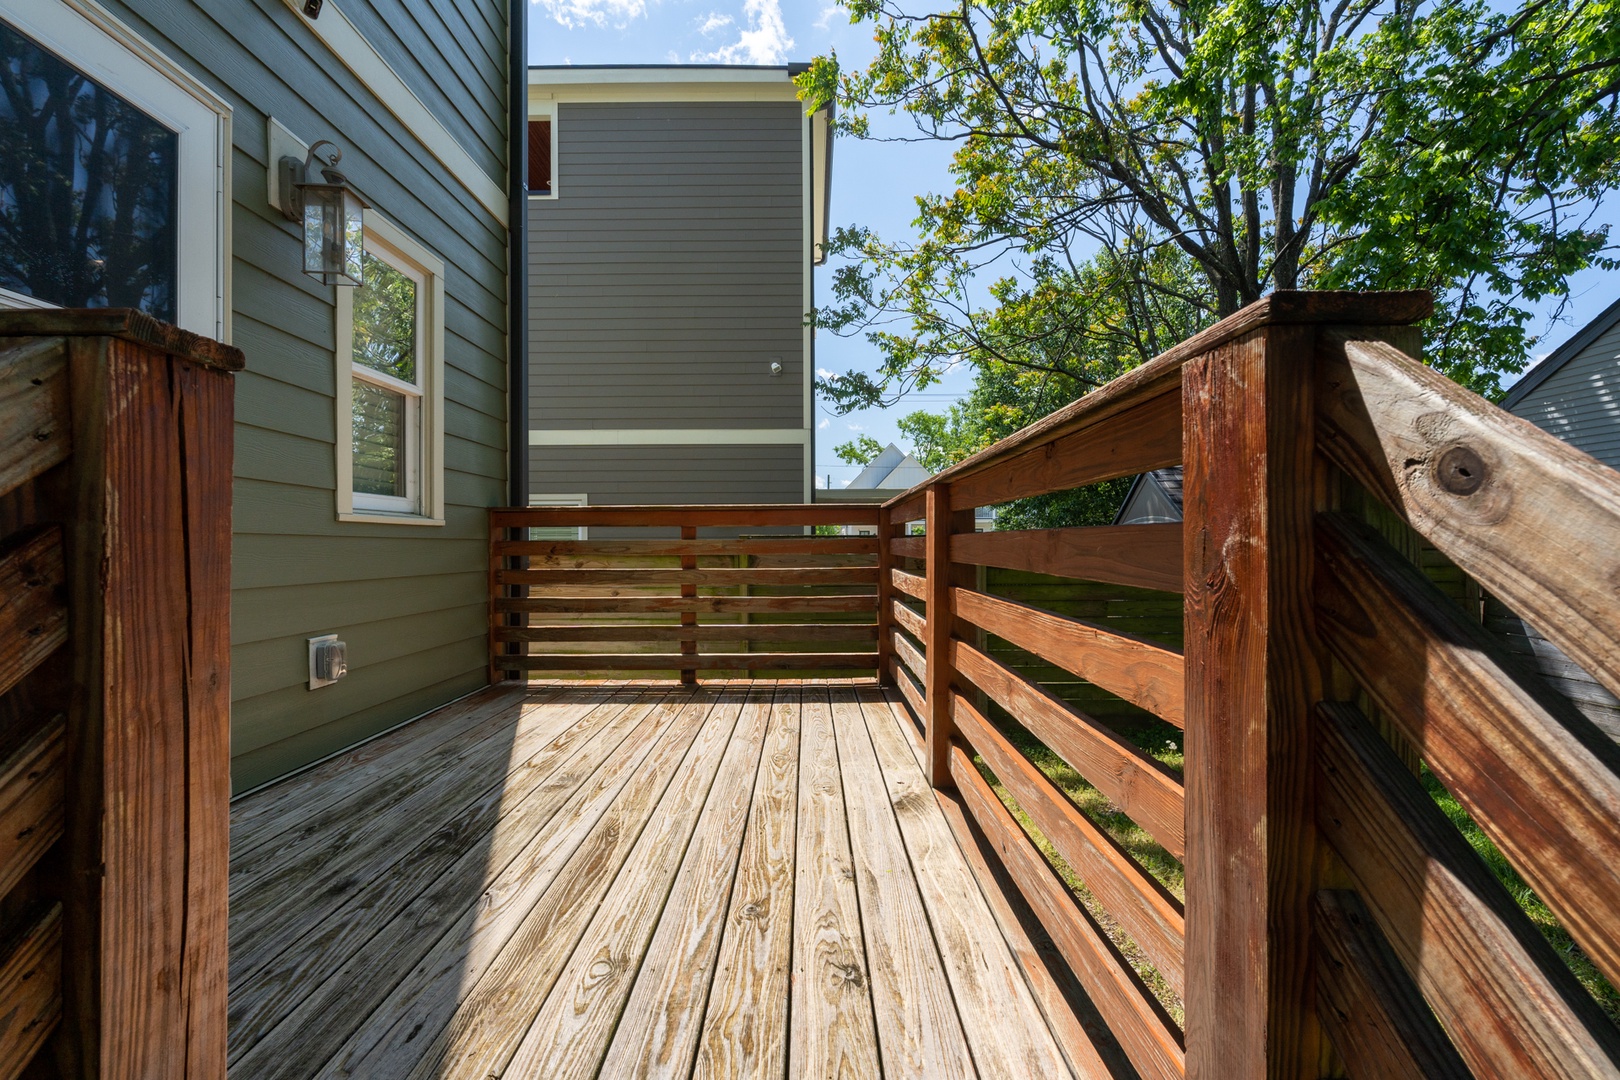 Head inside via the spacious back deck after parking in the Driveway